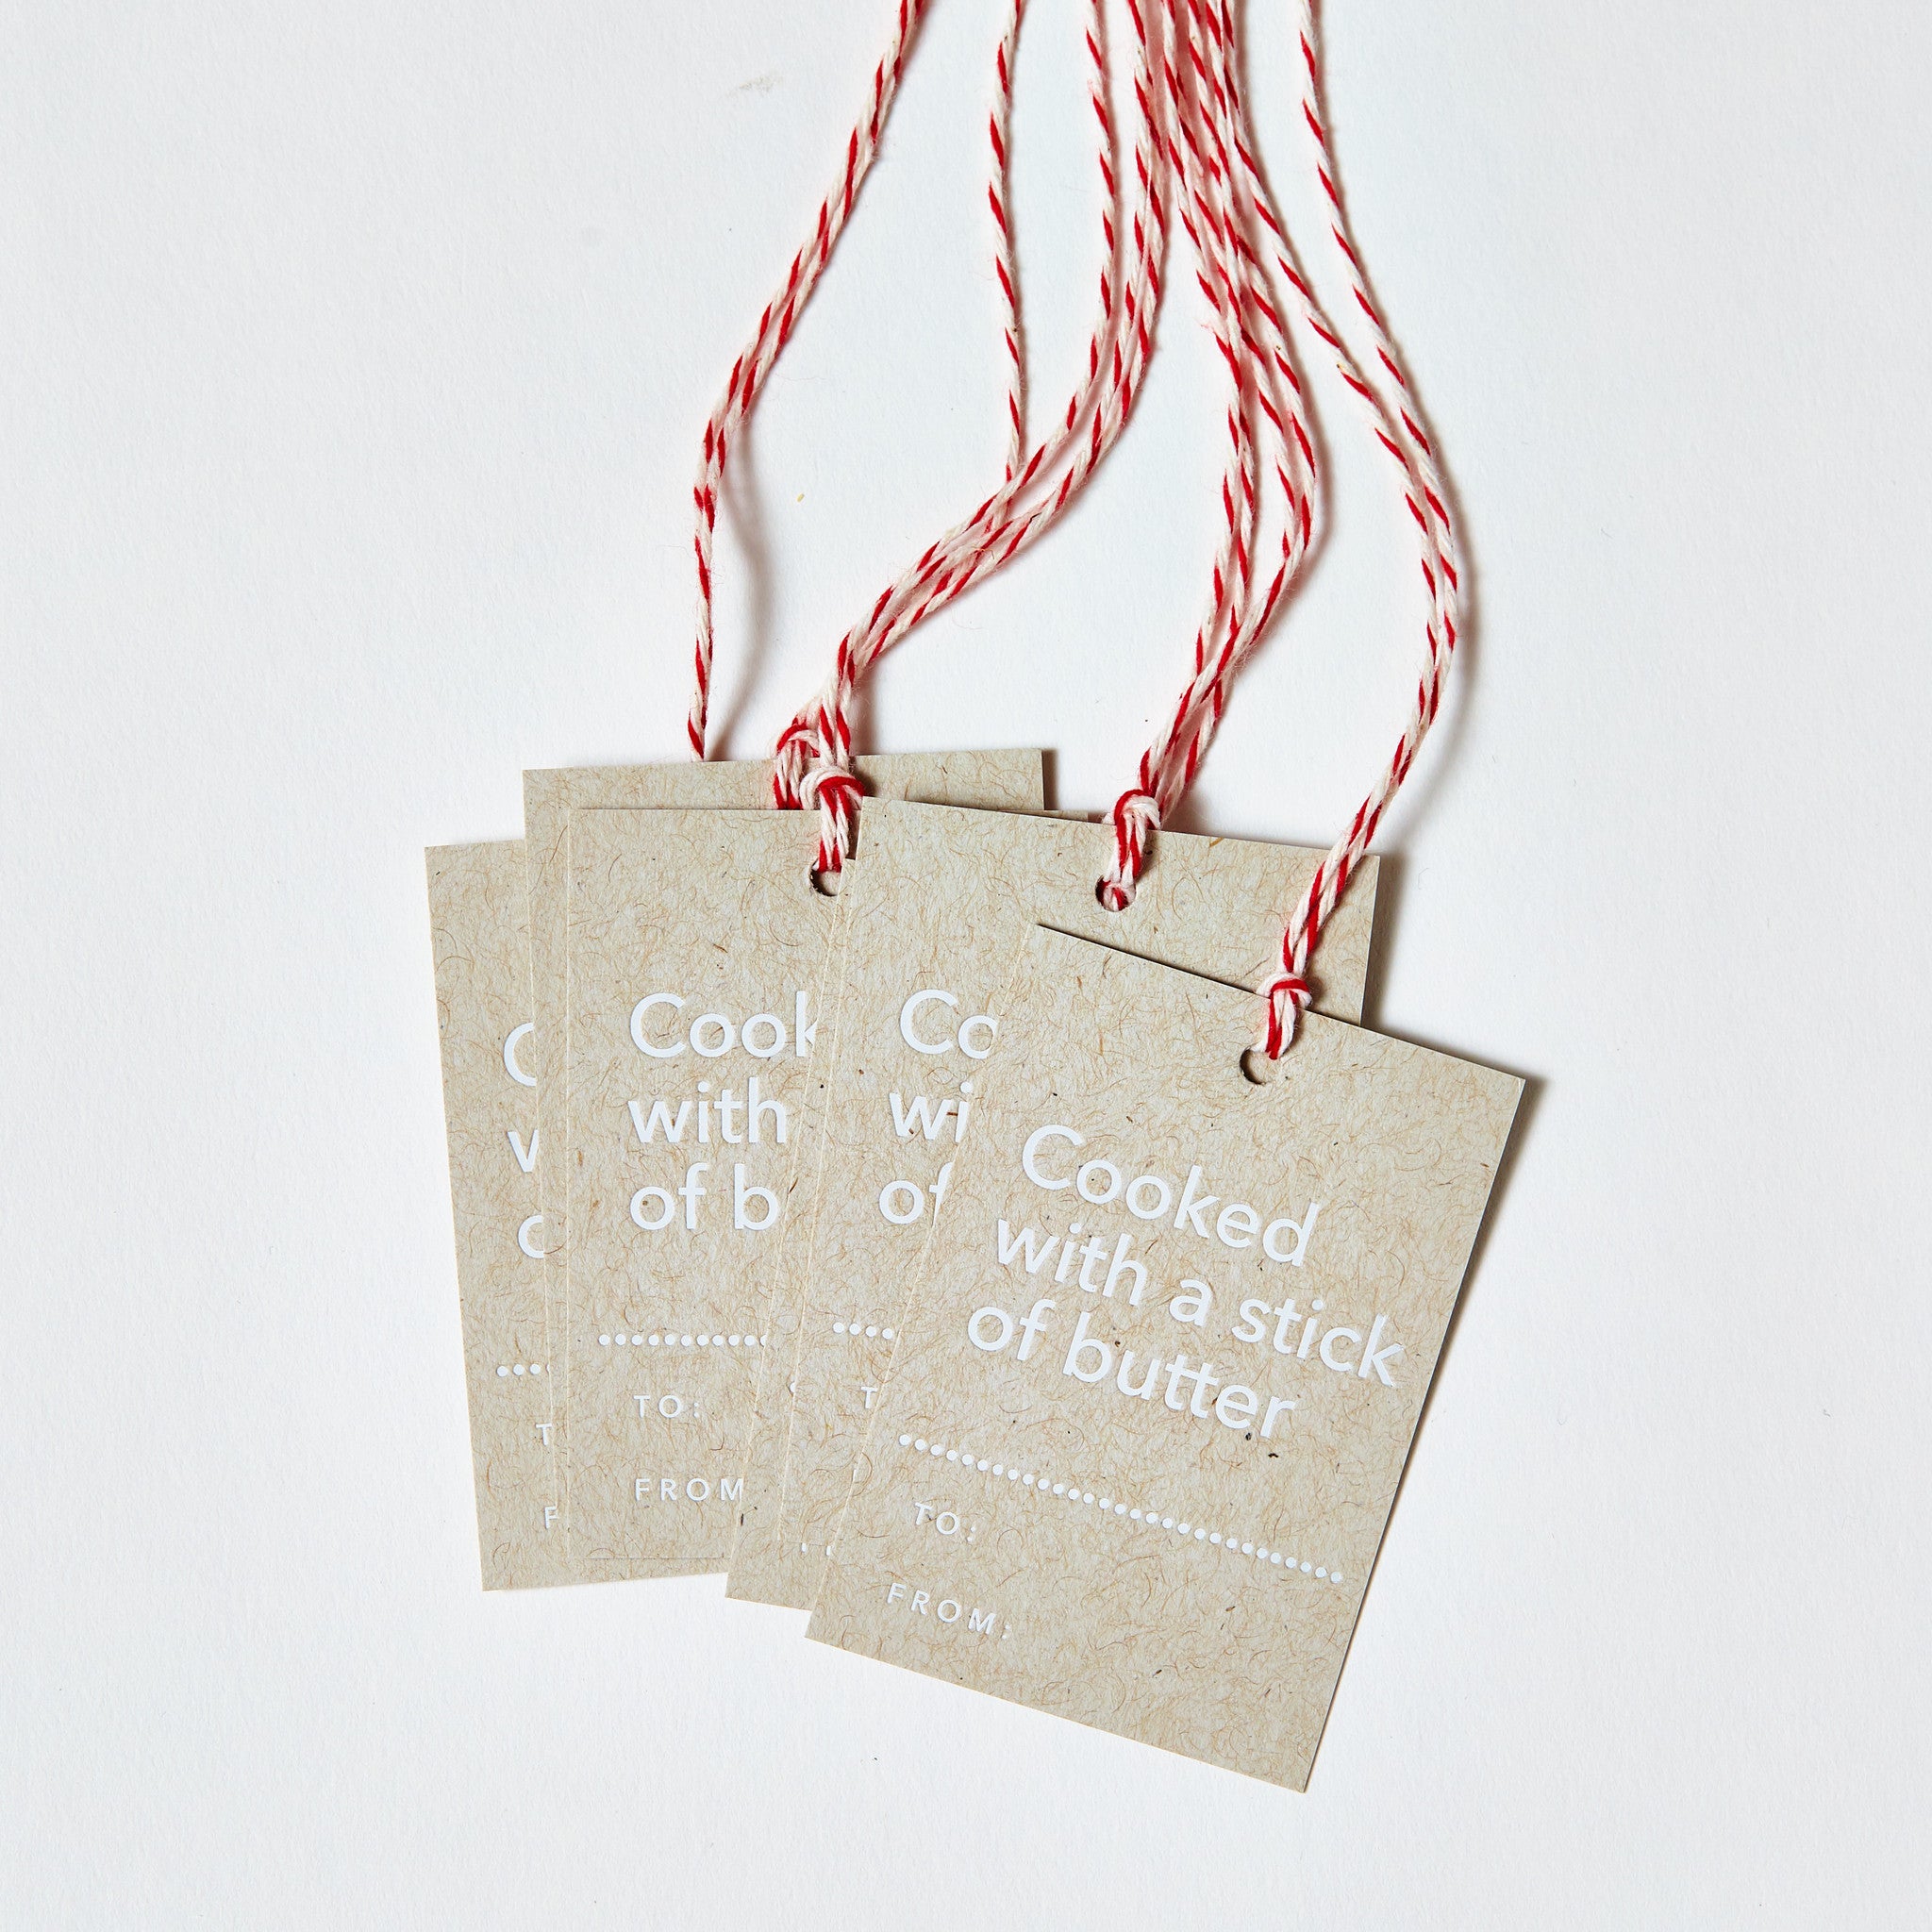 Set of 6, White Foil Printed Gift Tags - Cooked with a stick of butter